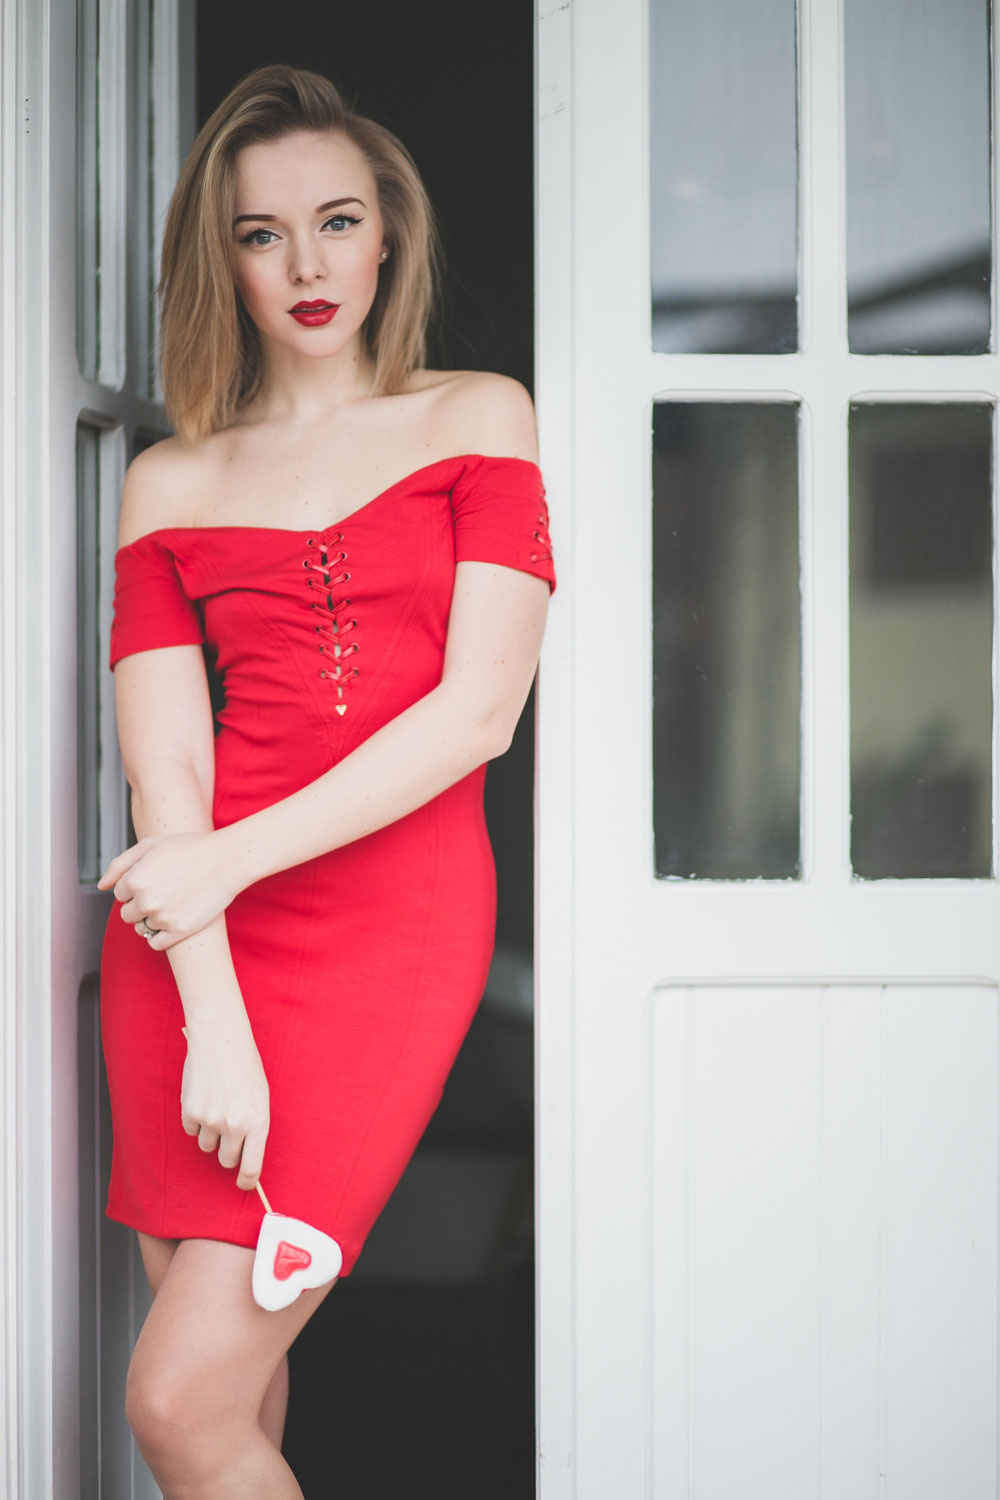 darya-kamalova-thecablook-fashion-lifestyle-russian-italian-blogger-wears-red-guess-dress-on-saint-valentines-day-outfil-with-red-lips--9414